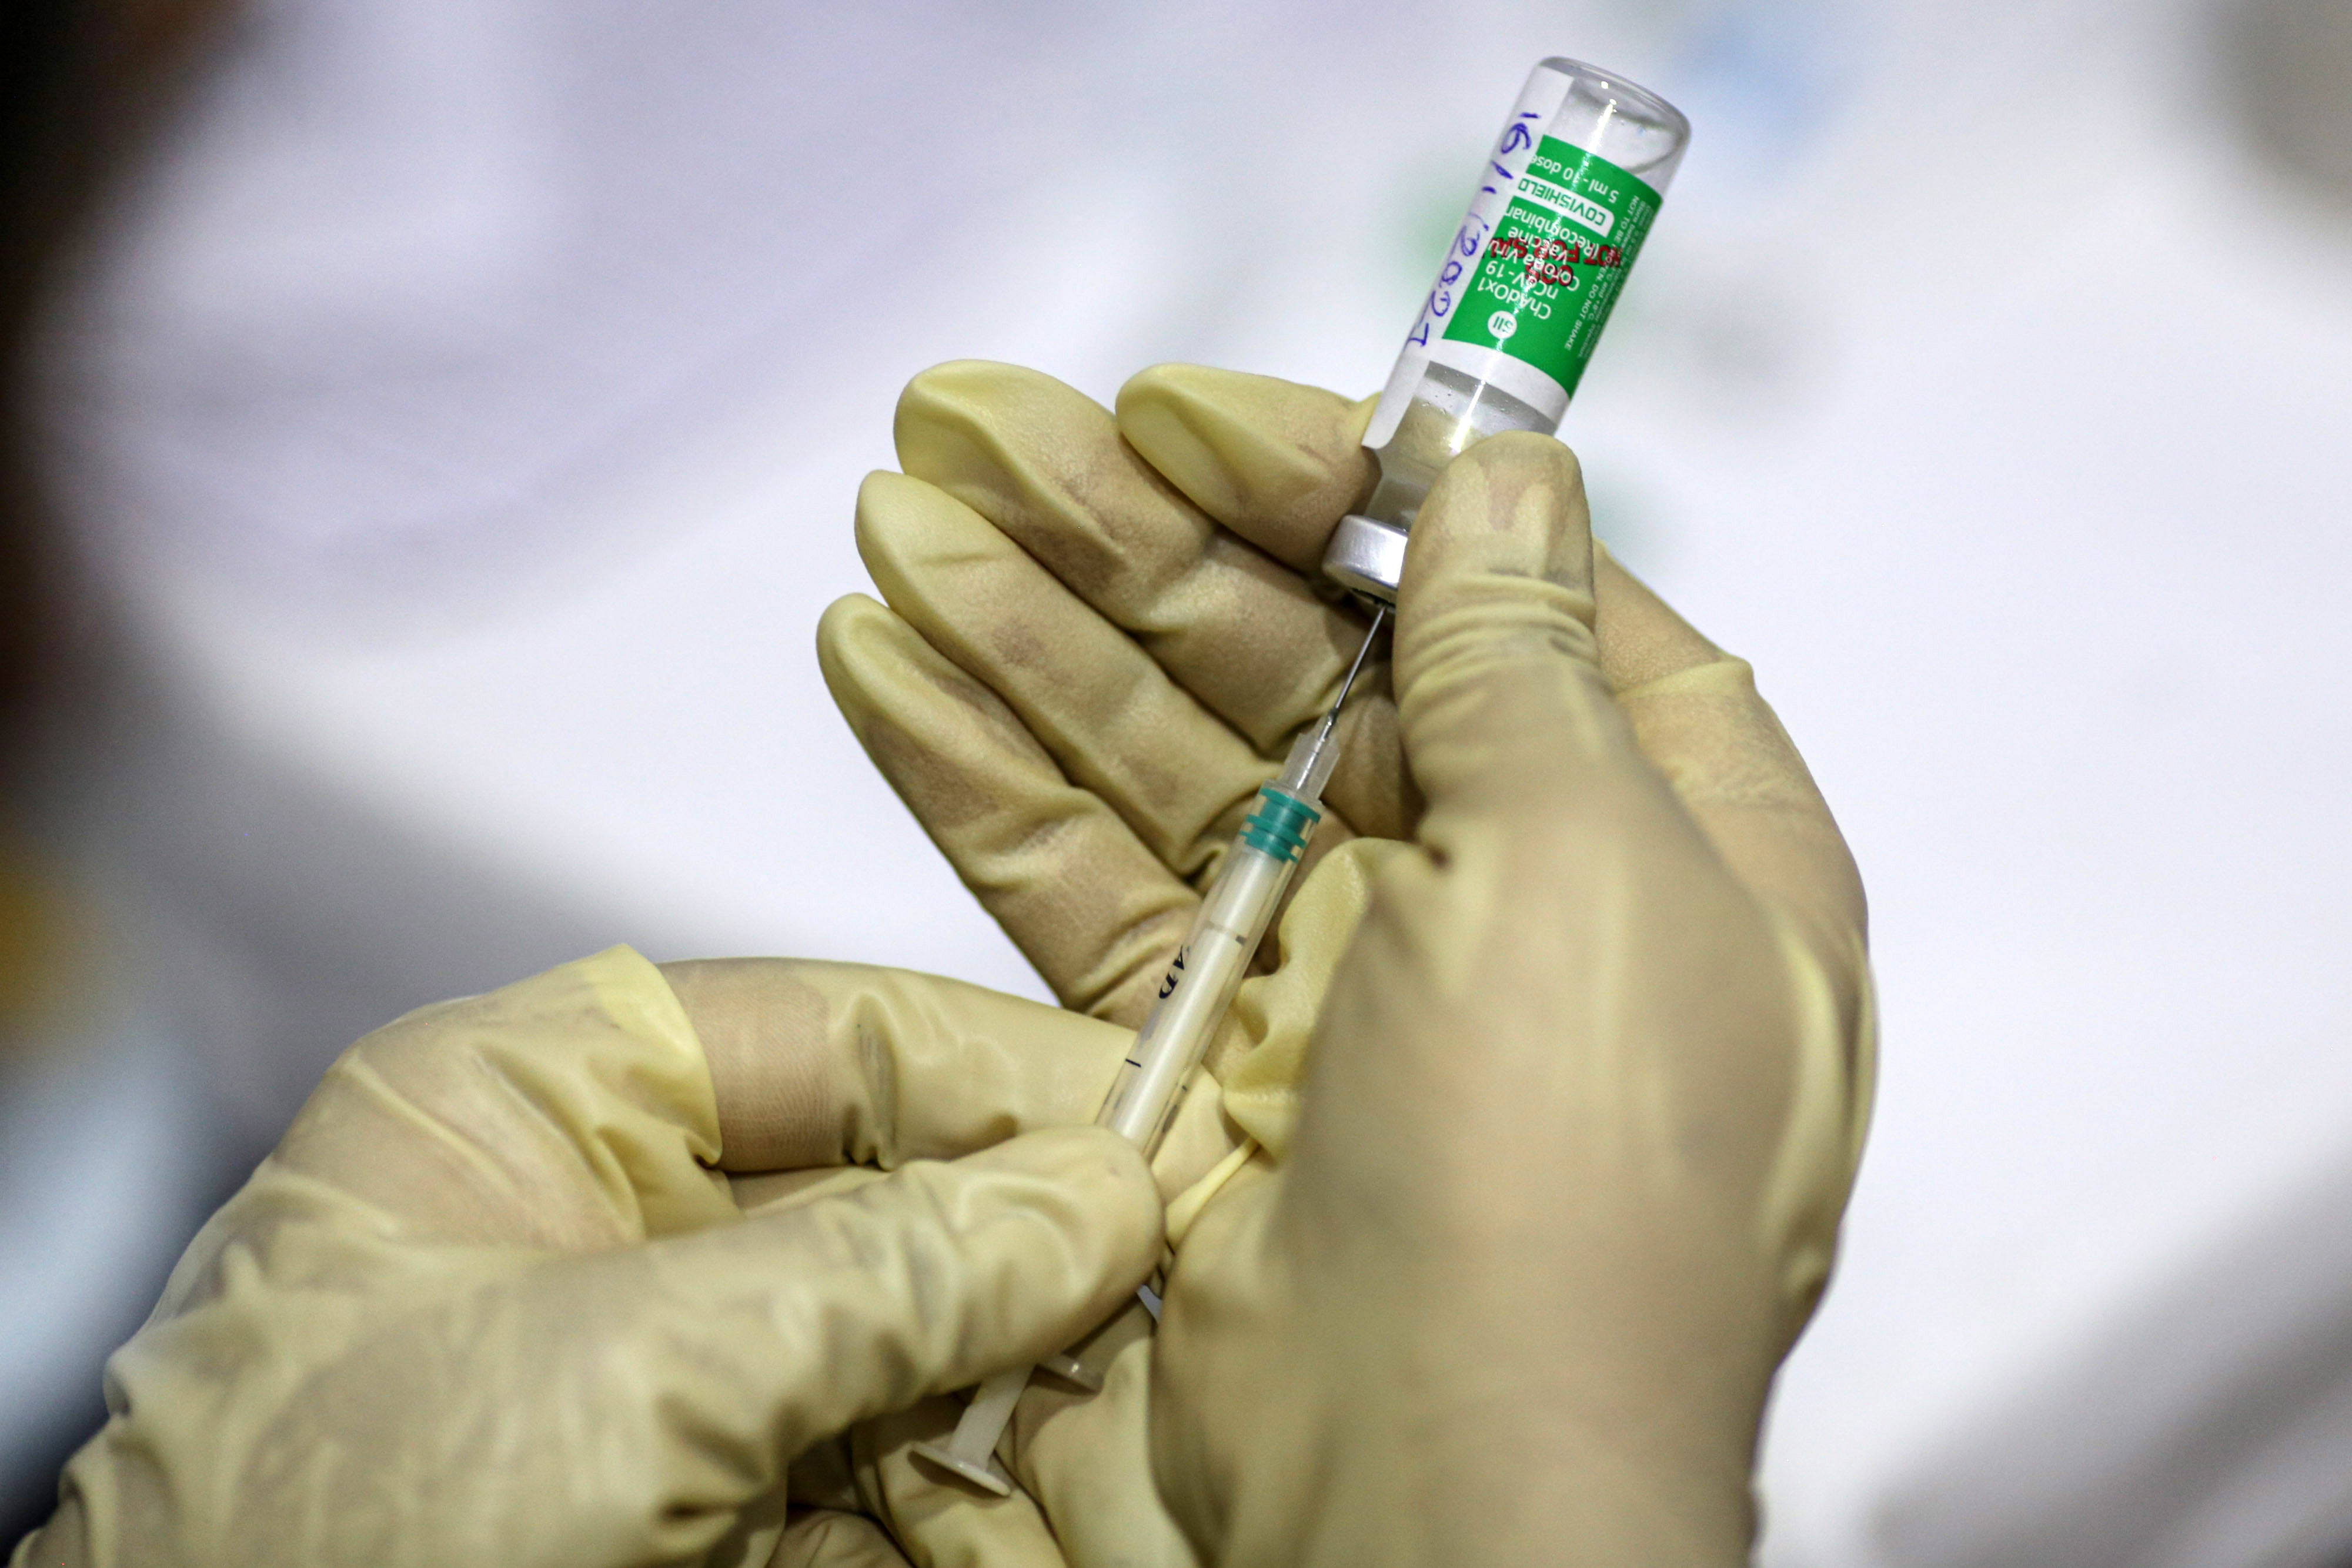 A nurse draws from a vial of the Covishield vaccine — developed by Oxford University and AstraZeneca, and manufactured by the Serum Institute of India — at a hospital in Mumbai, India, on January 16.